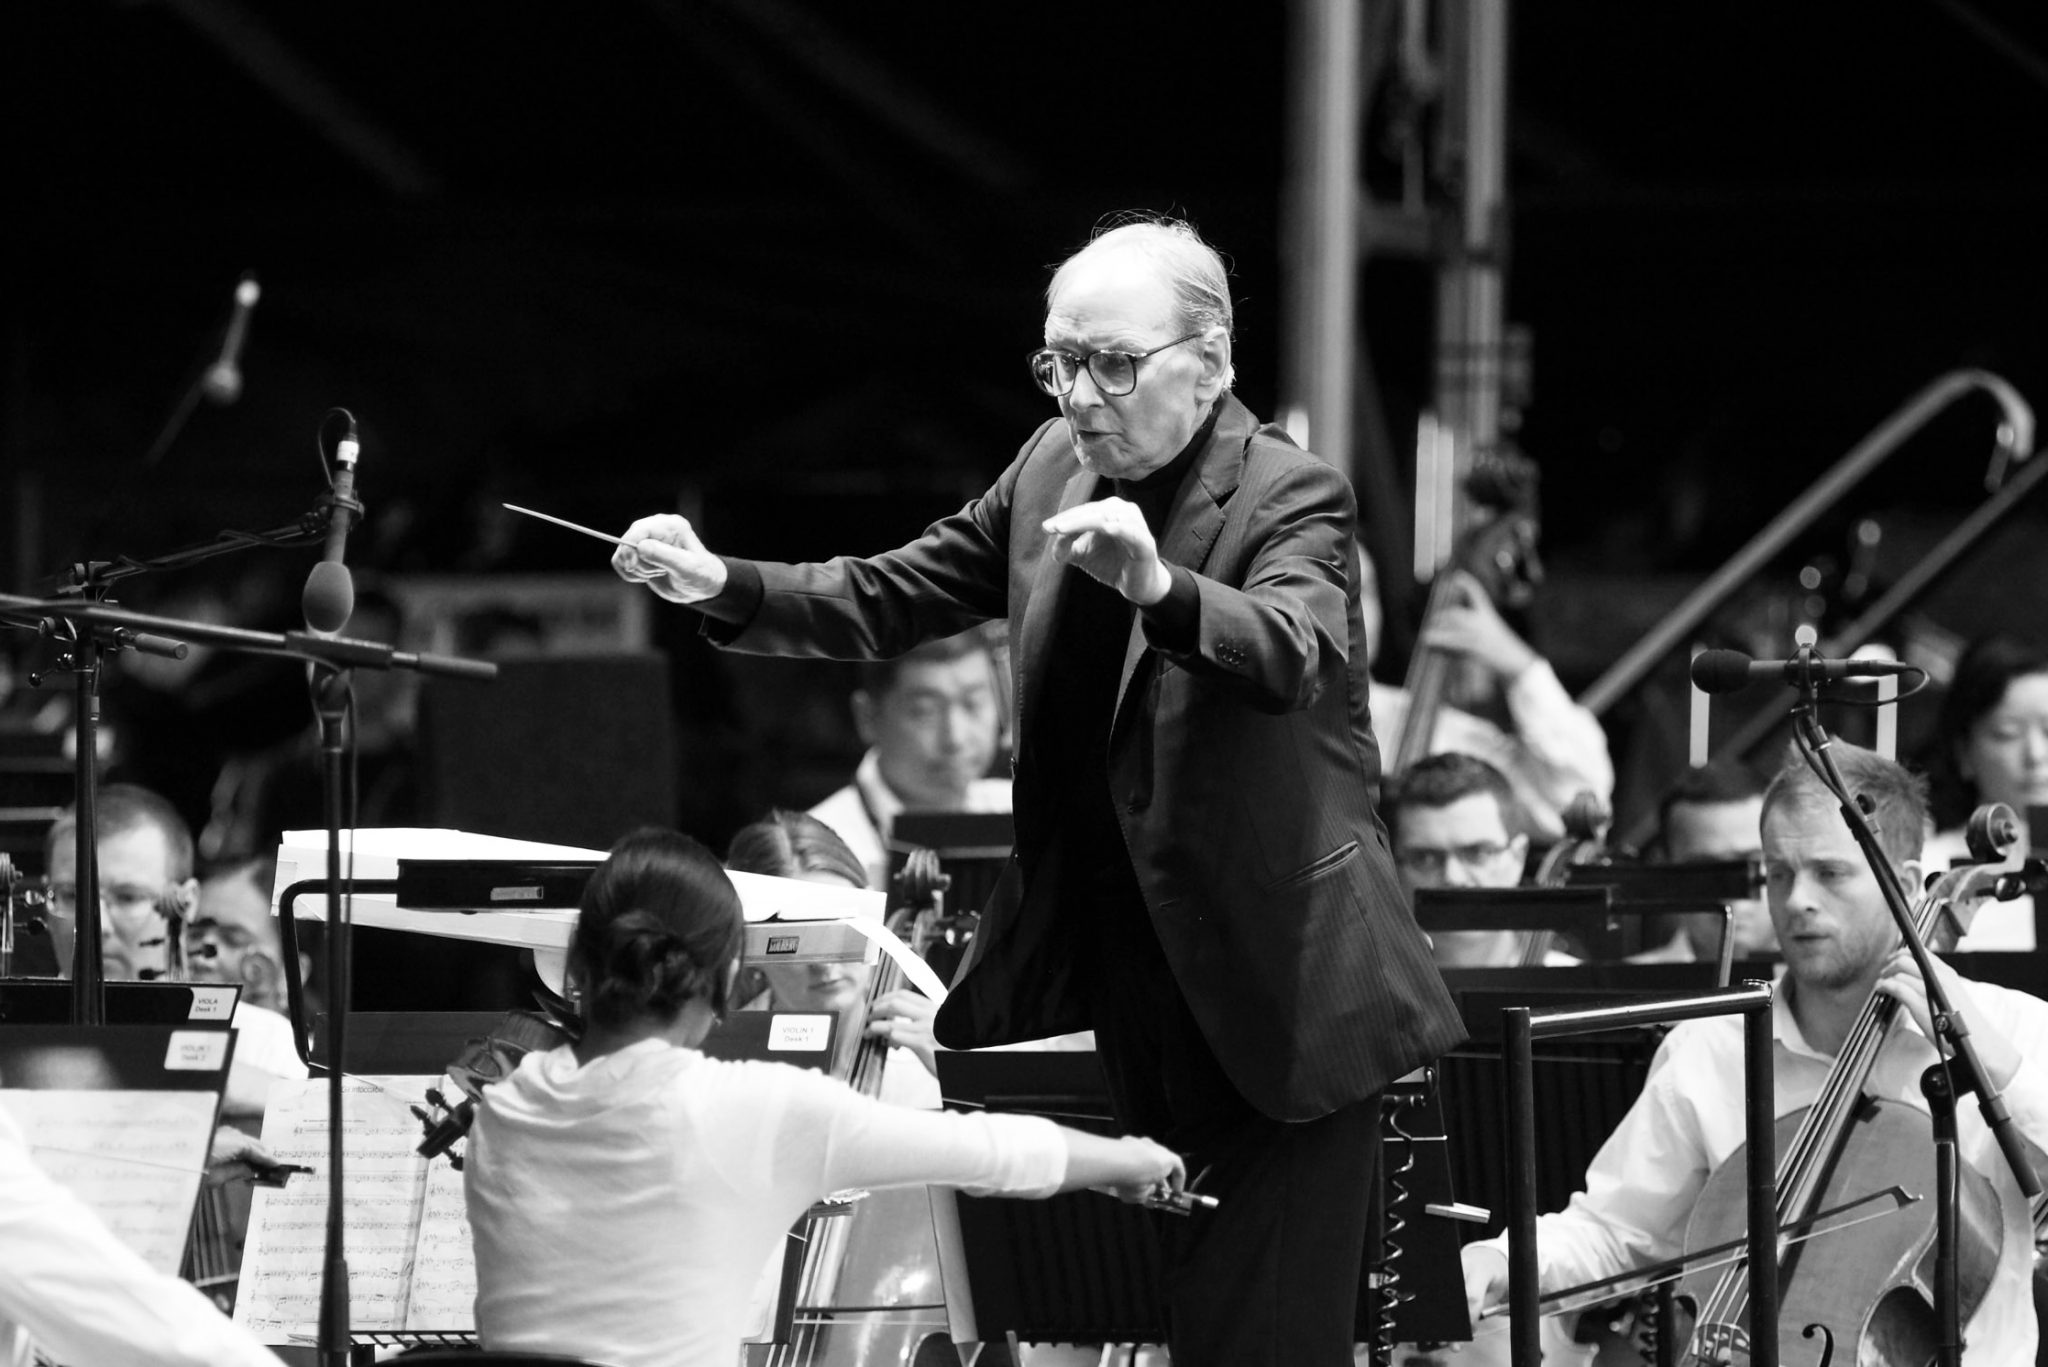 Remembering Ennio Morricone ‘He’s one of my alltime musical heroes